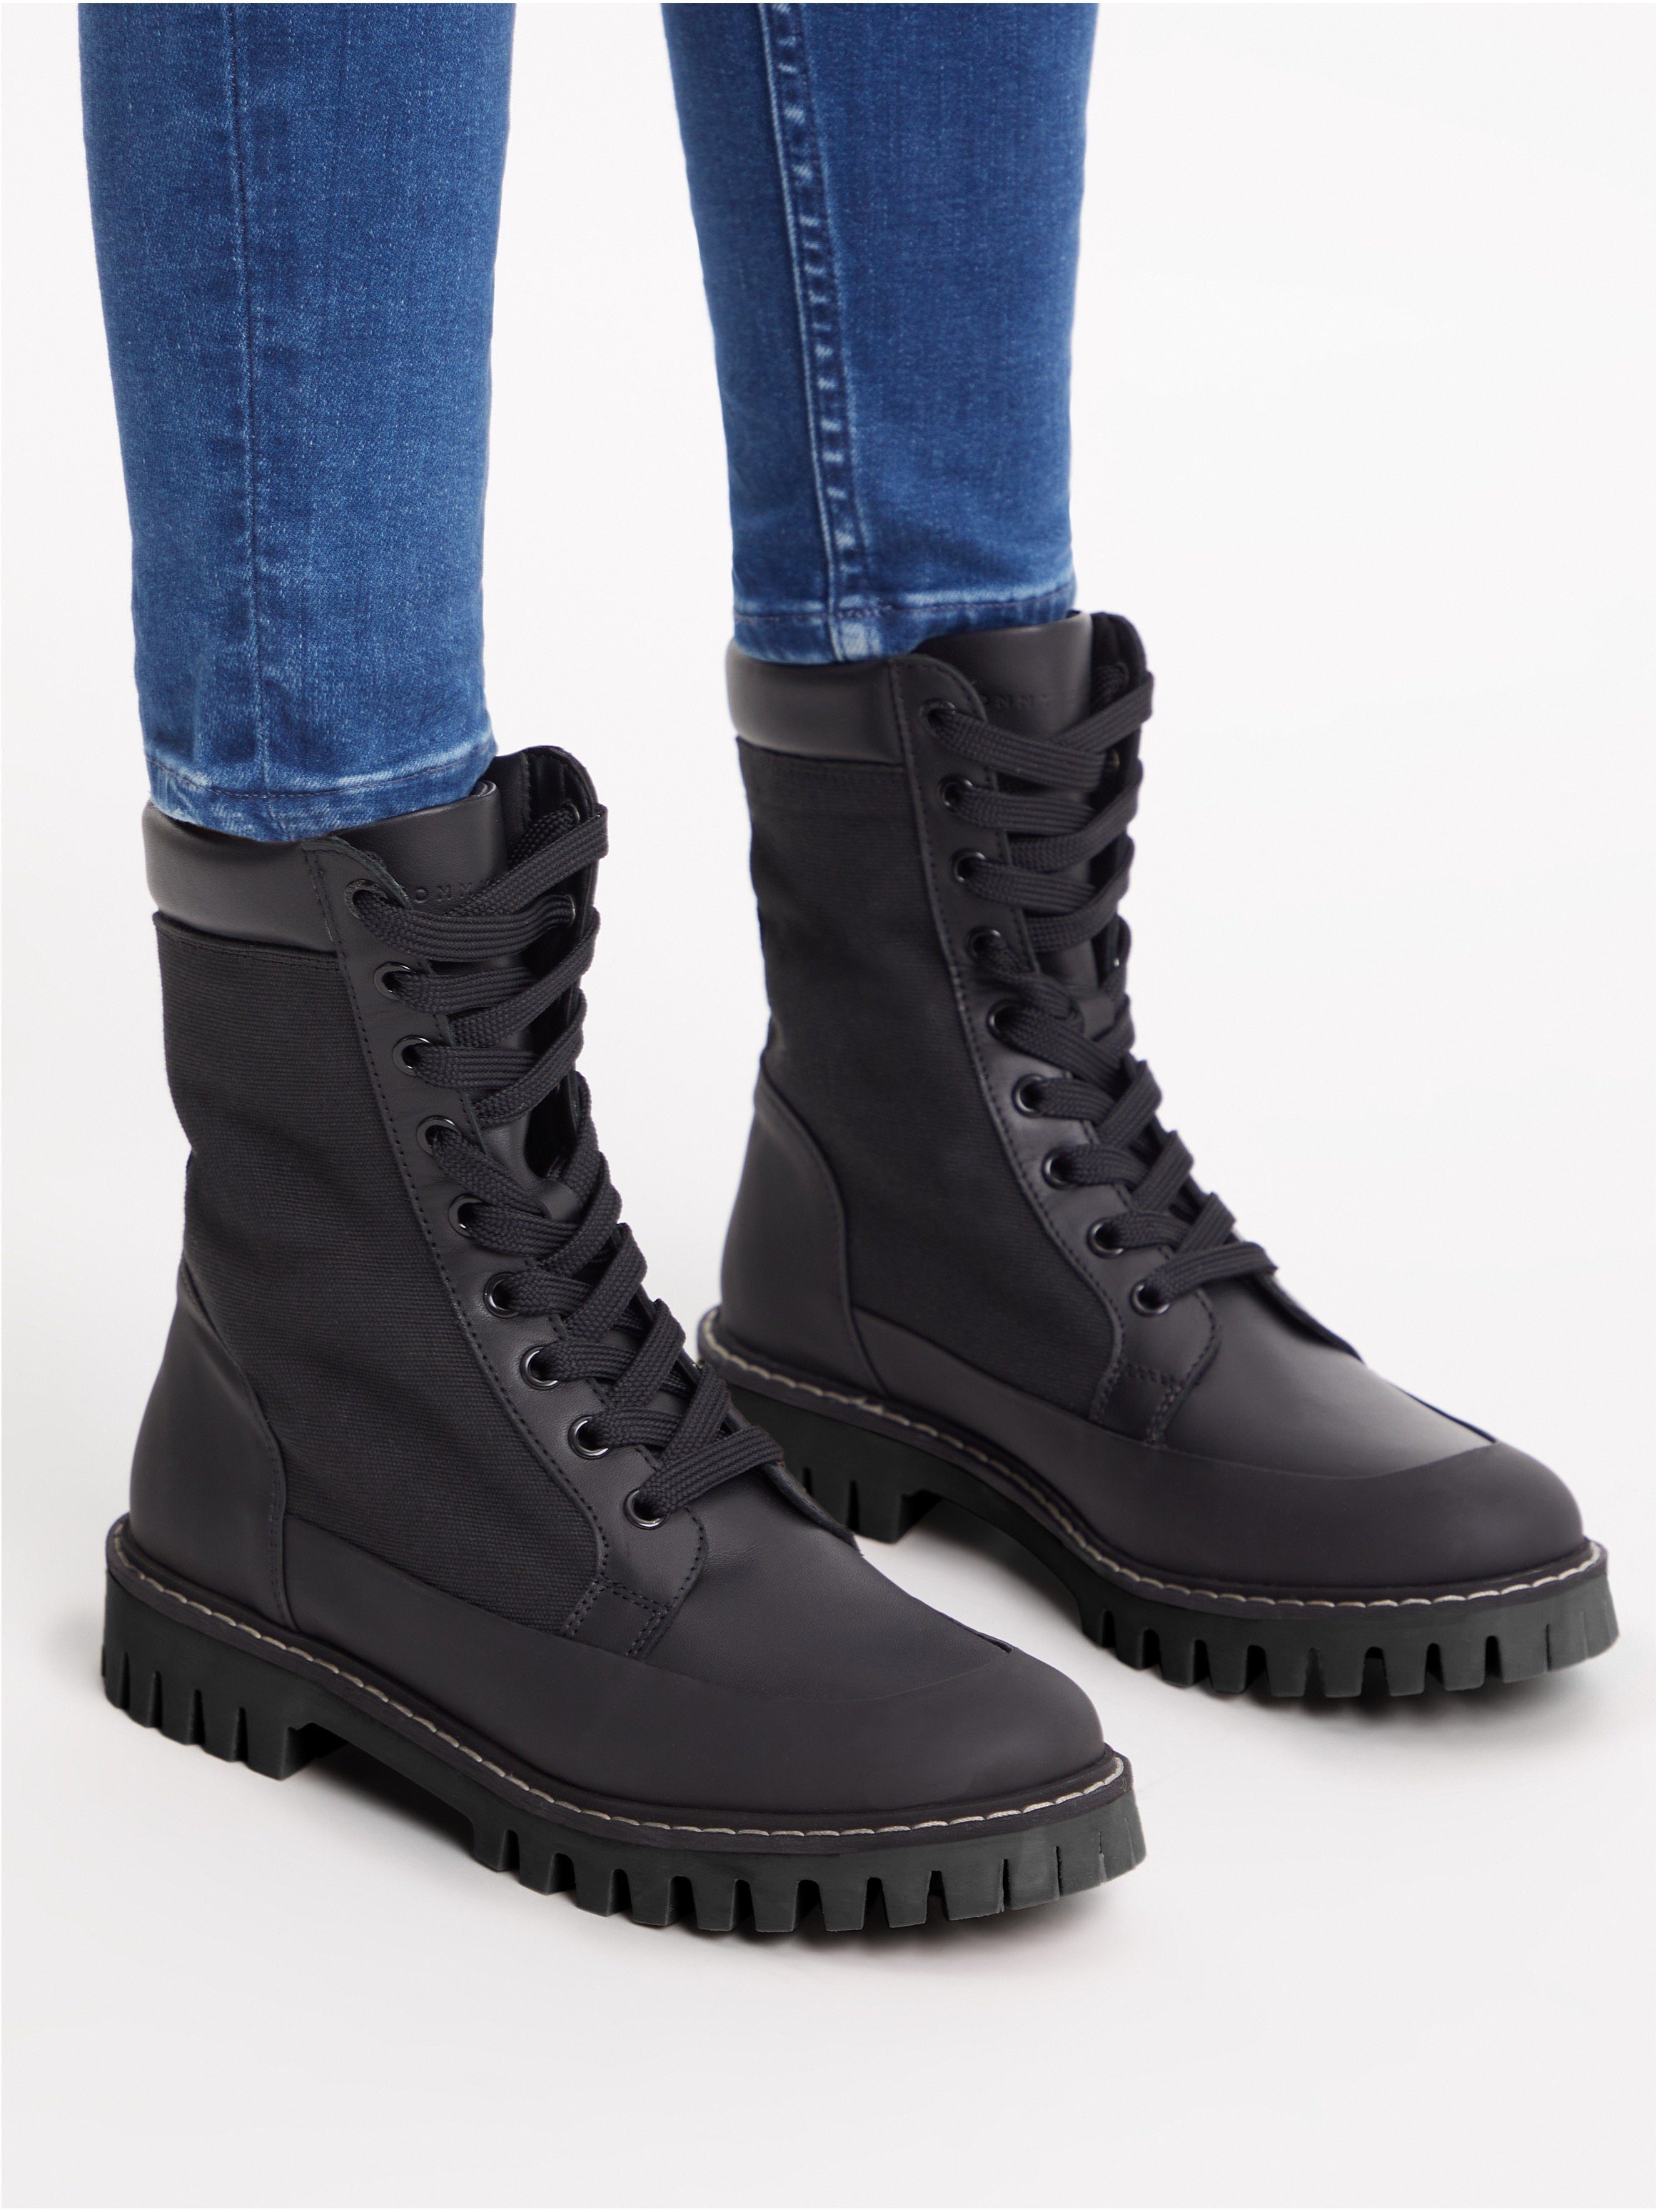 BOOT CASUAL schwarz LACE UP derbem Schnürboots in Style Hilfiger TH Tommy